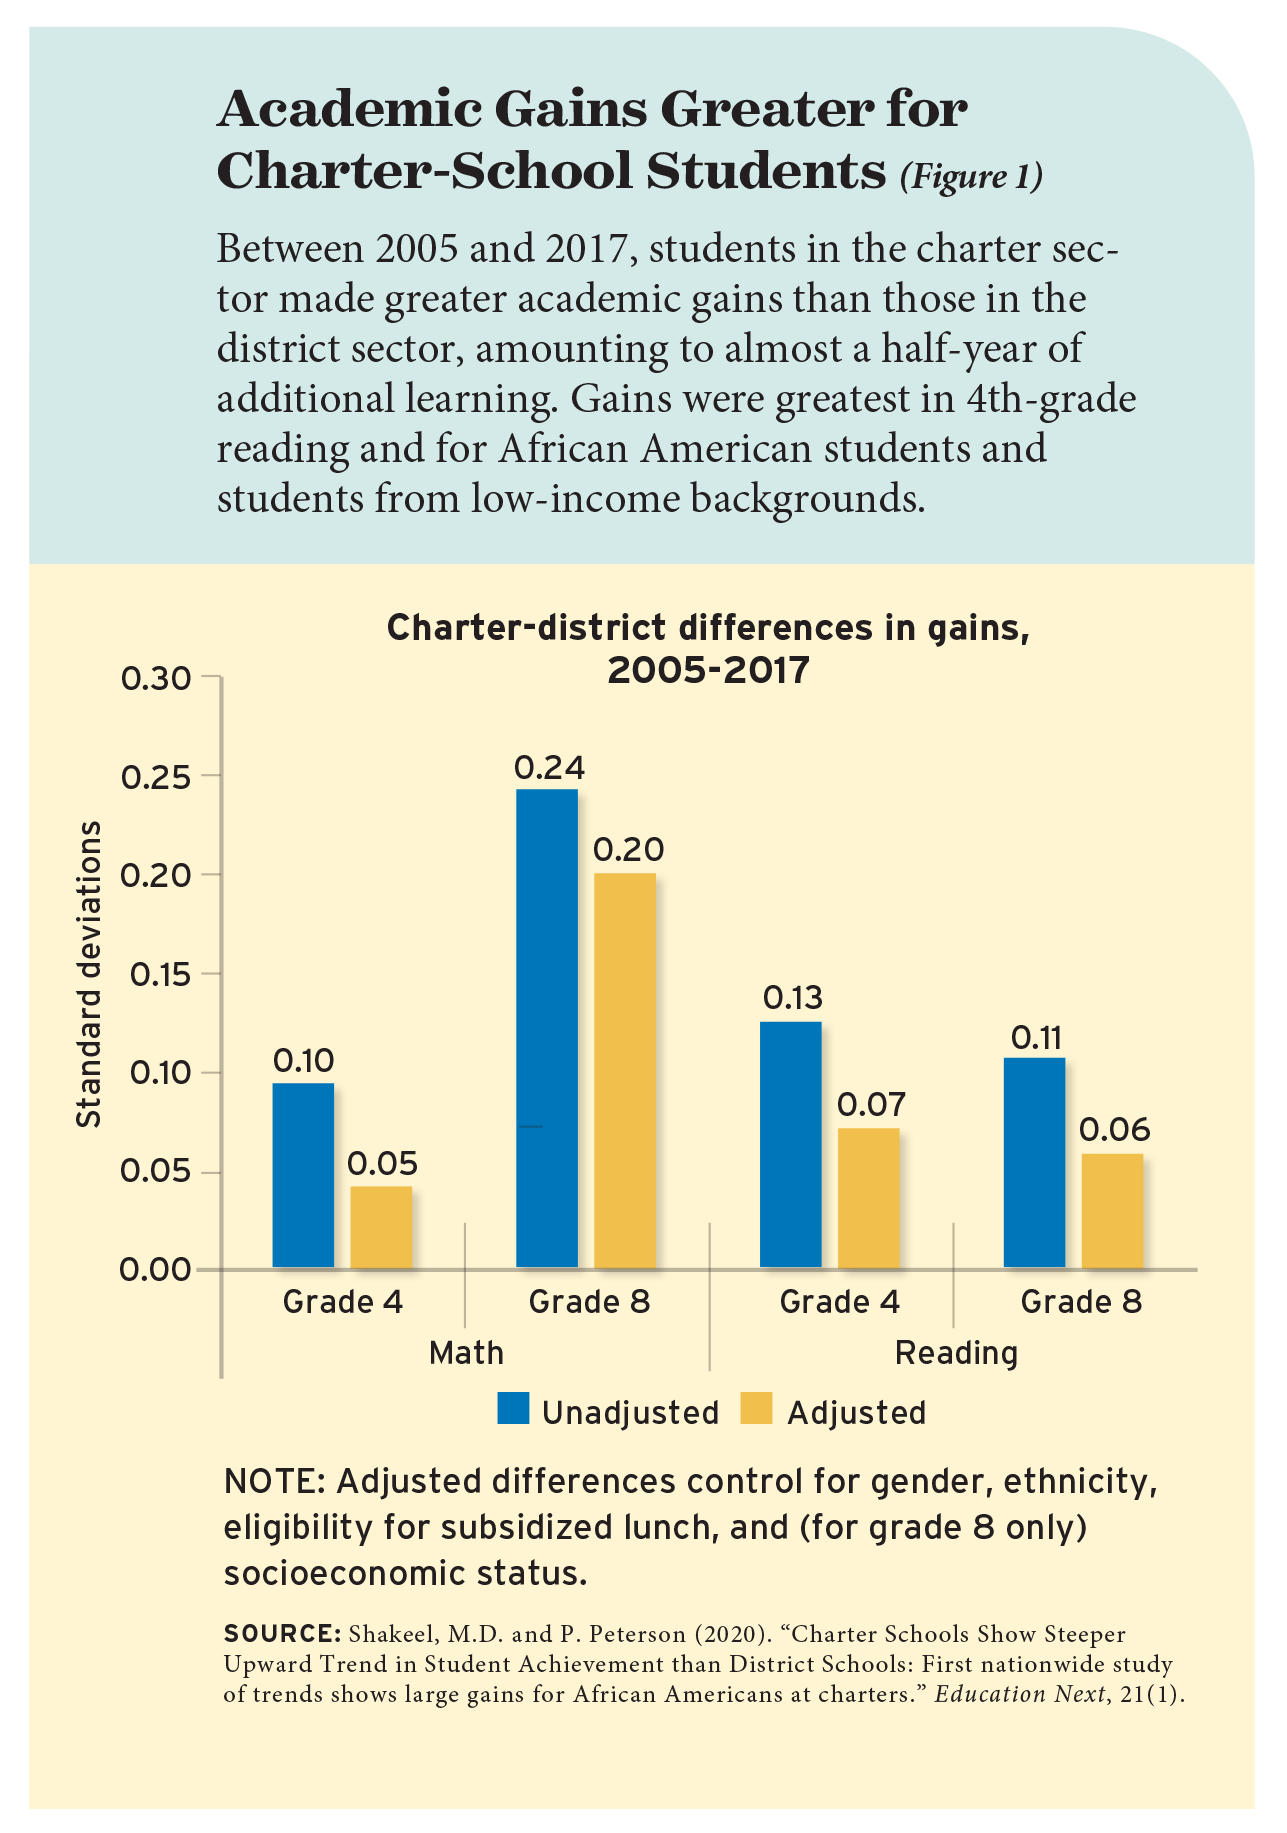 Academic Gains Greater for Charter-School Students (Figure 1)